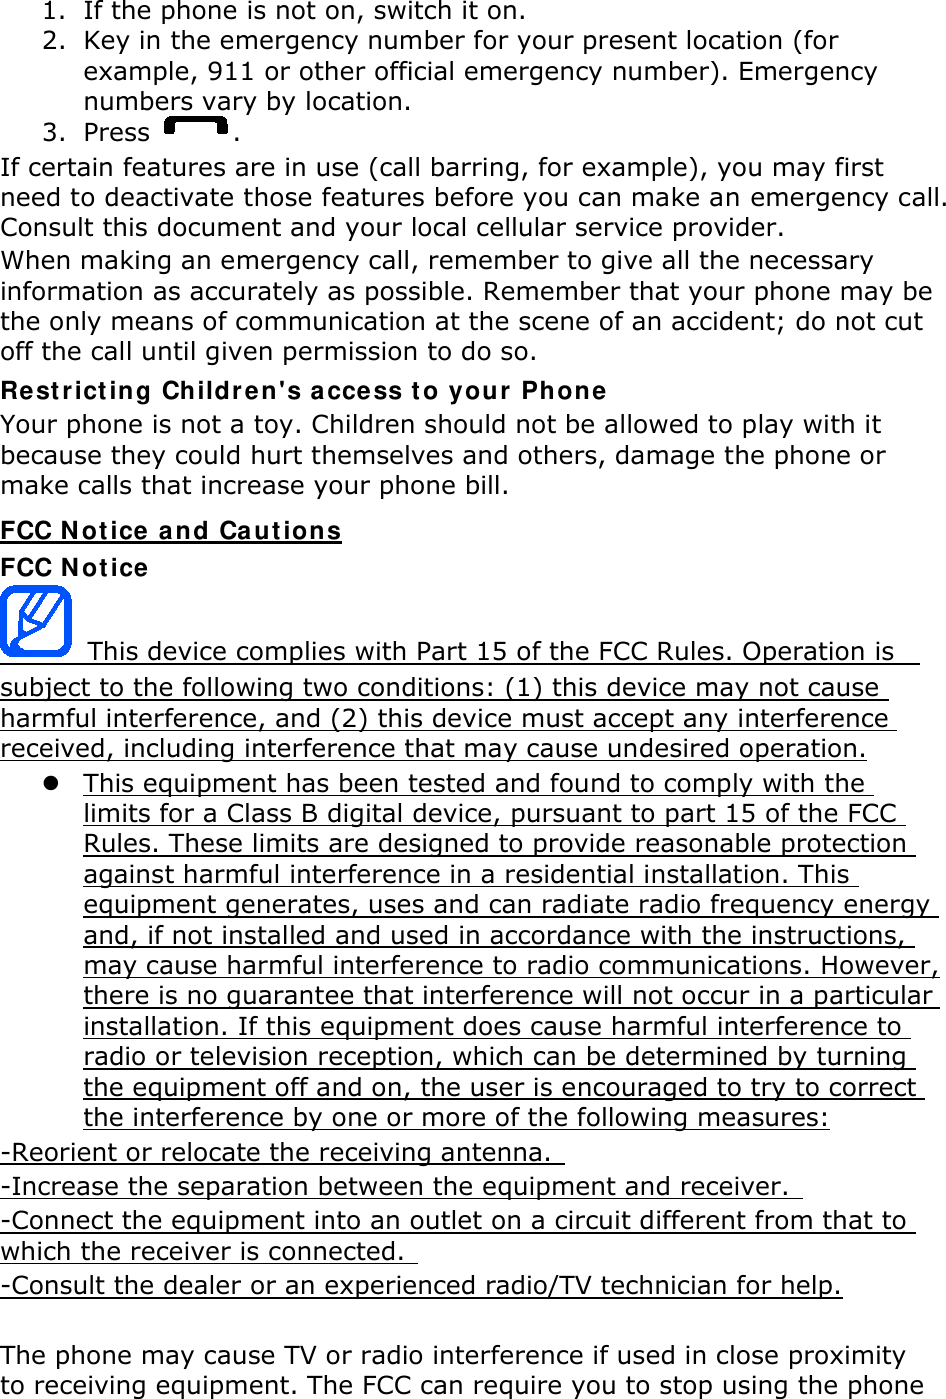 1. If the phone is not on, switch it on. 2. Key in the emergency number for your present location (for example, 911 or other official emergency number). Emergency numbers vary by location. 3. Press  . If certain features are in use (call barring, for example), you may first need to deactivate those features before you can make an emergency call. Consult this document and your local cellular service provider. When making an emergency call, remember to give all the necessary information as accurately as possible. Remember that your phone may be the only means of communication at the scene of an accident; do not cut off the call until given permission to do so. Re st r ict ing Childr en&apos;s a cce ss t o your Phone  Your phone is not a toy. Children should not be allowed to play with it because they could hurt themselves and others, damage the phone or make calls that increase your phone bill. FCC N ot ice a nd Ca utions FCC N ot ice  This device complies with Part 15 of the FCC Rules. Operation is   subject to the following two conditions: (1) this device may not cause harmful interference, and (2) this device must accept any interference received, including interference that may cause undesired operation.  This equipment has been tested and found to comply with the limits for a Class B digital device, pursuant to part 15 of the FCC Rules. These limits are designed to provide reasonable protection against harmful interference in a residential installation. This equipment generates, uses and can radiate radio frequency energy and, if not installed and used in accordance with the instructions, may cause harmful interference to radio communications. However, there is no guarantee that interference will not occur in a particular installation. If this equipment does cause harmful interference to radio or television reception, which can be determined by turning the equipment off and on, the user is encouraged to try to correct the interference by one or more of the following measures: -Reorient or relocate the receiving antenna.   -Increase the separation between the equipment and receiver.   -Connect the equipment into an outlet on a circuit different from that to which the receiver is connected.   -Consult the dealer or an experienced radio/TV technician for help.  The phone may cause TV or radio interference if used in close proximity to receiving equipment. The FCC can require you to stop using the phone 